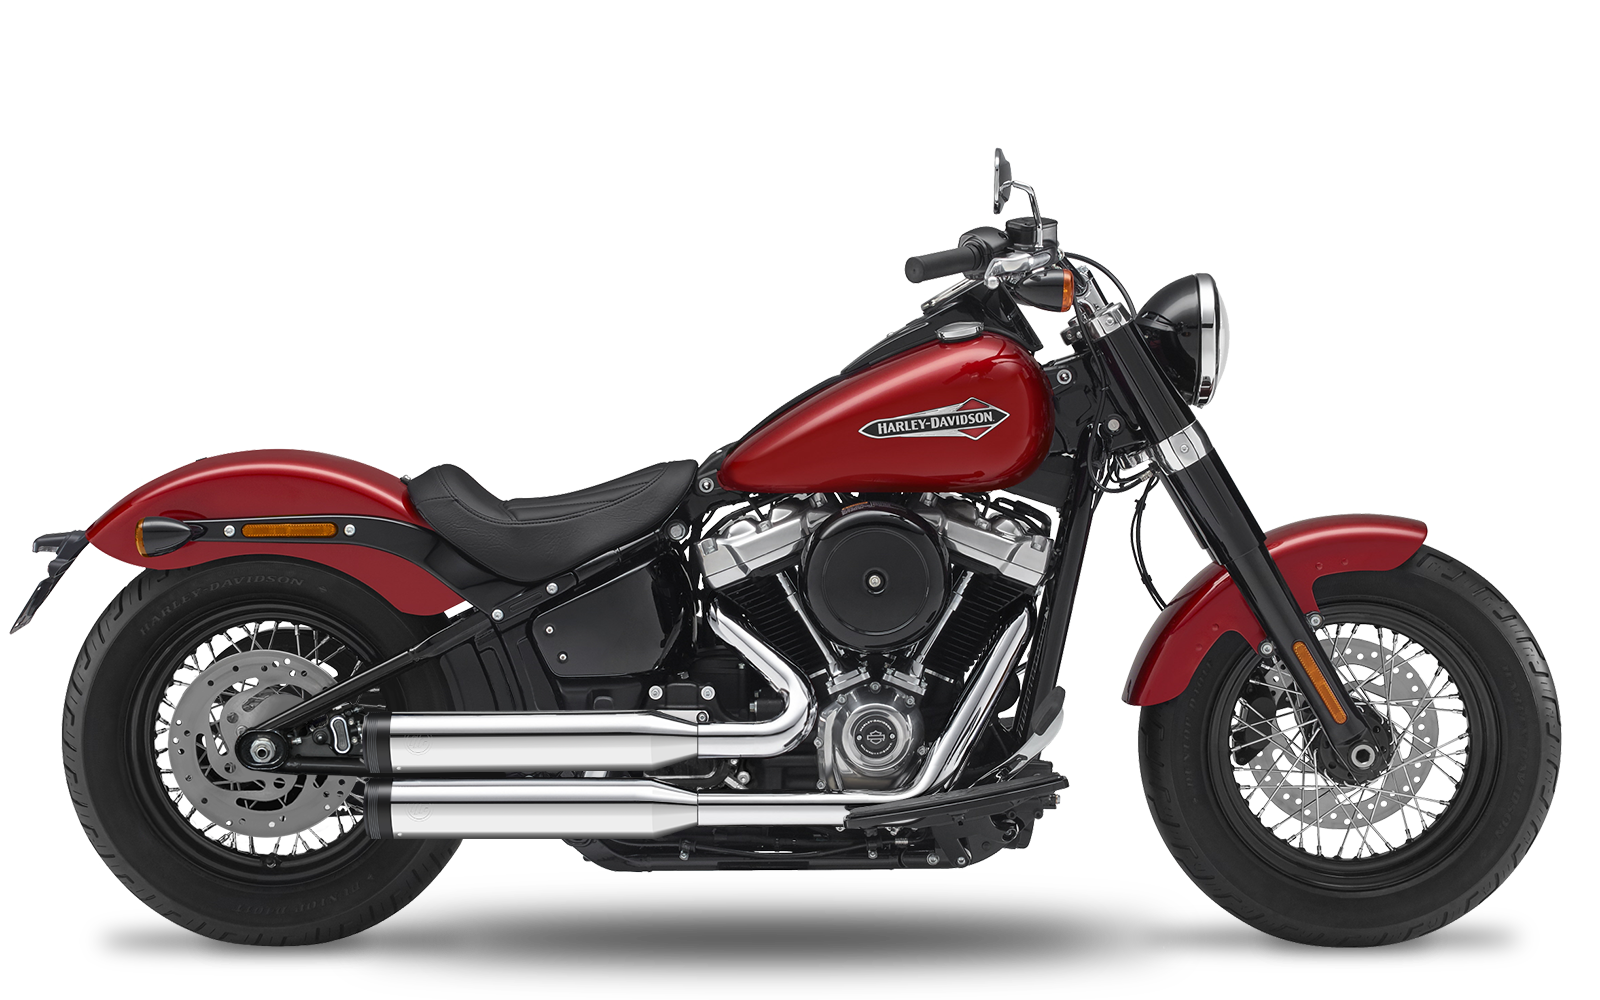 CRUISER/SOFTAIL - Low Rider - ME107 - 2018-2020 - Complete systems adjustable